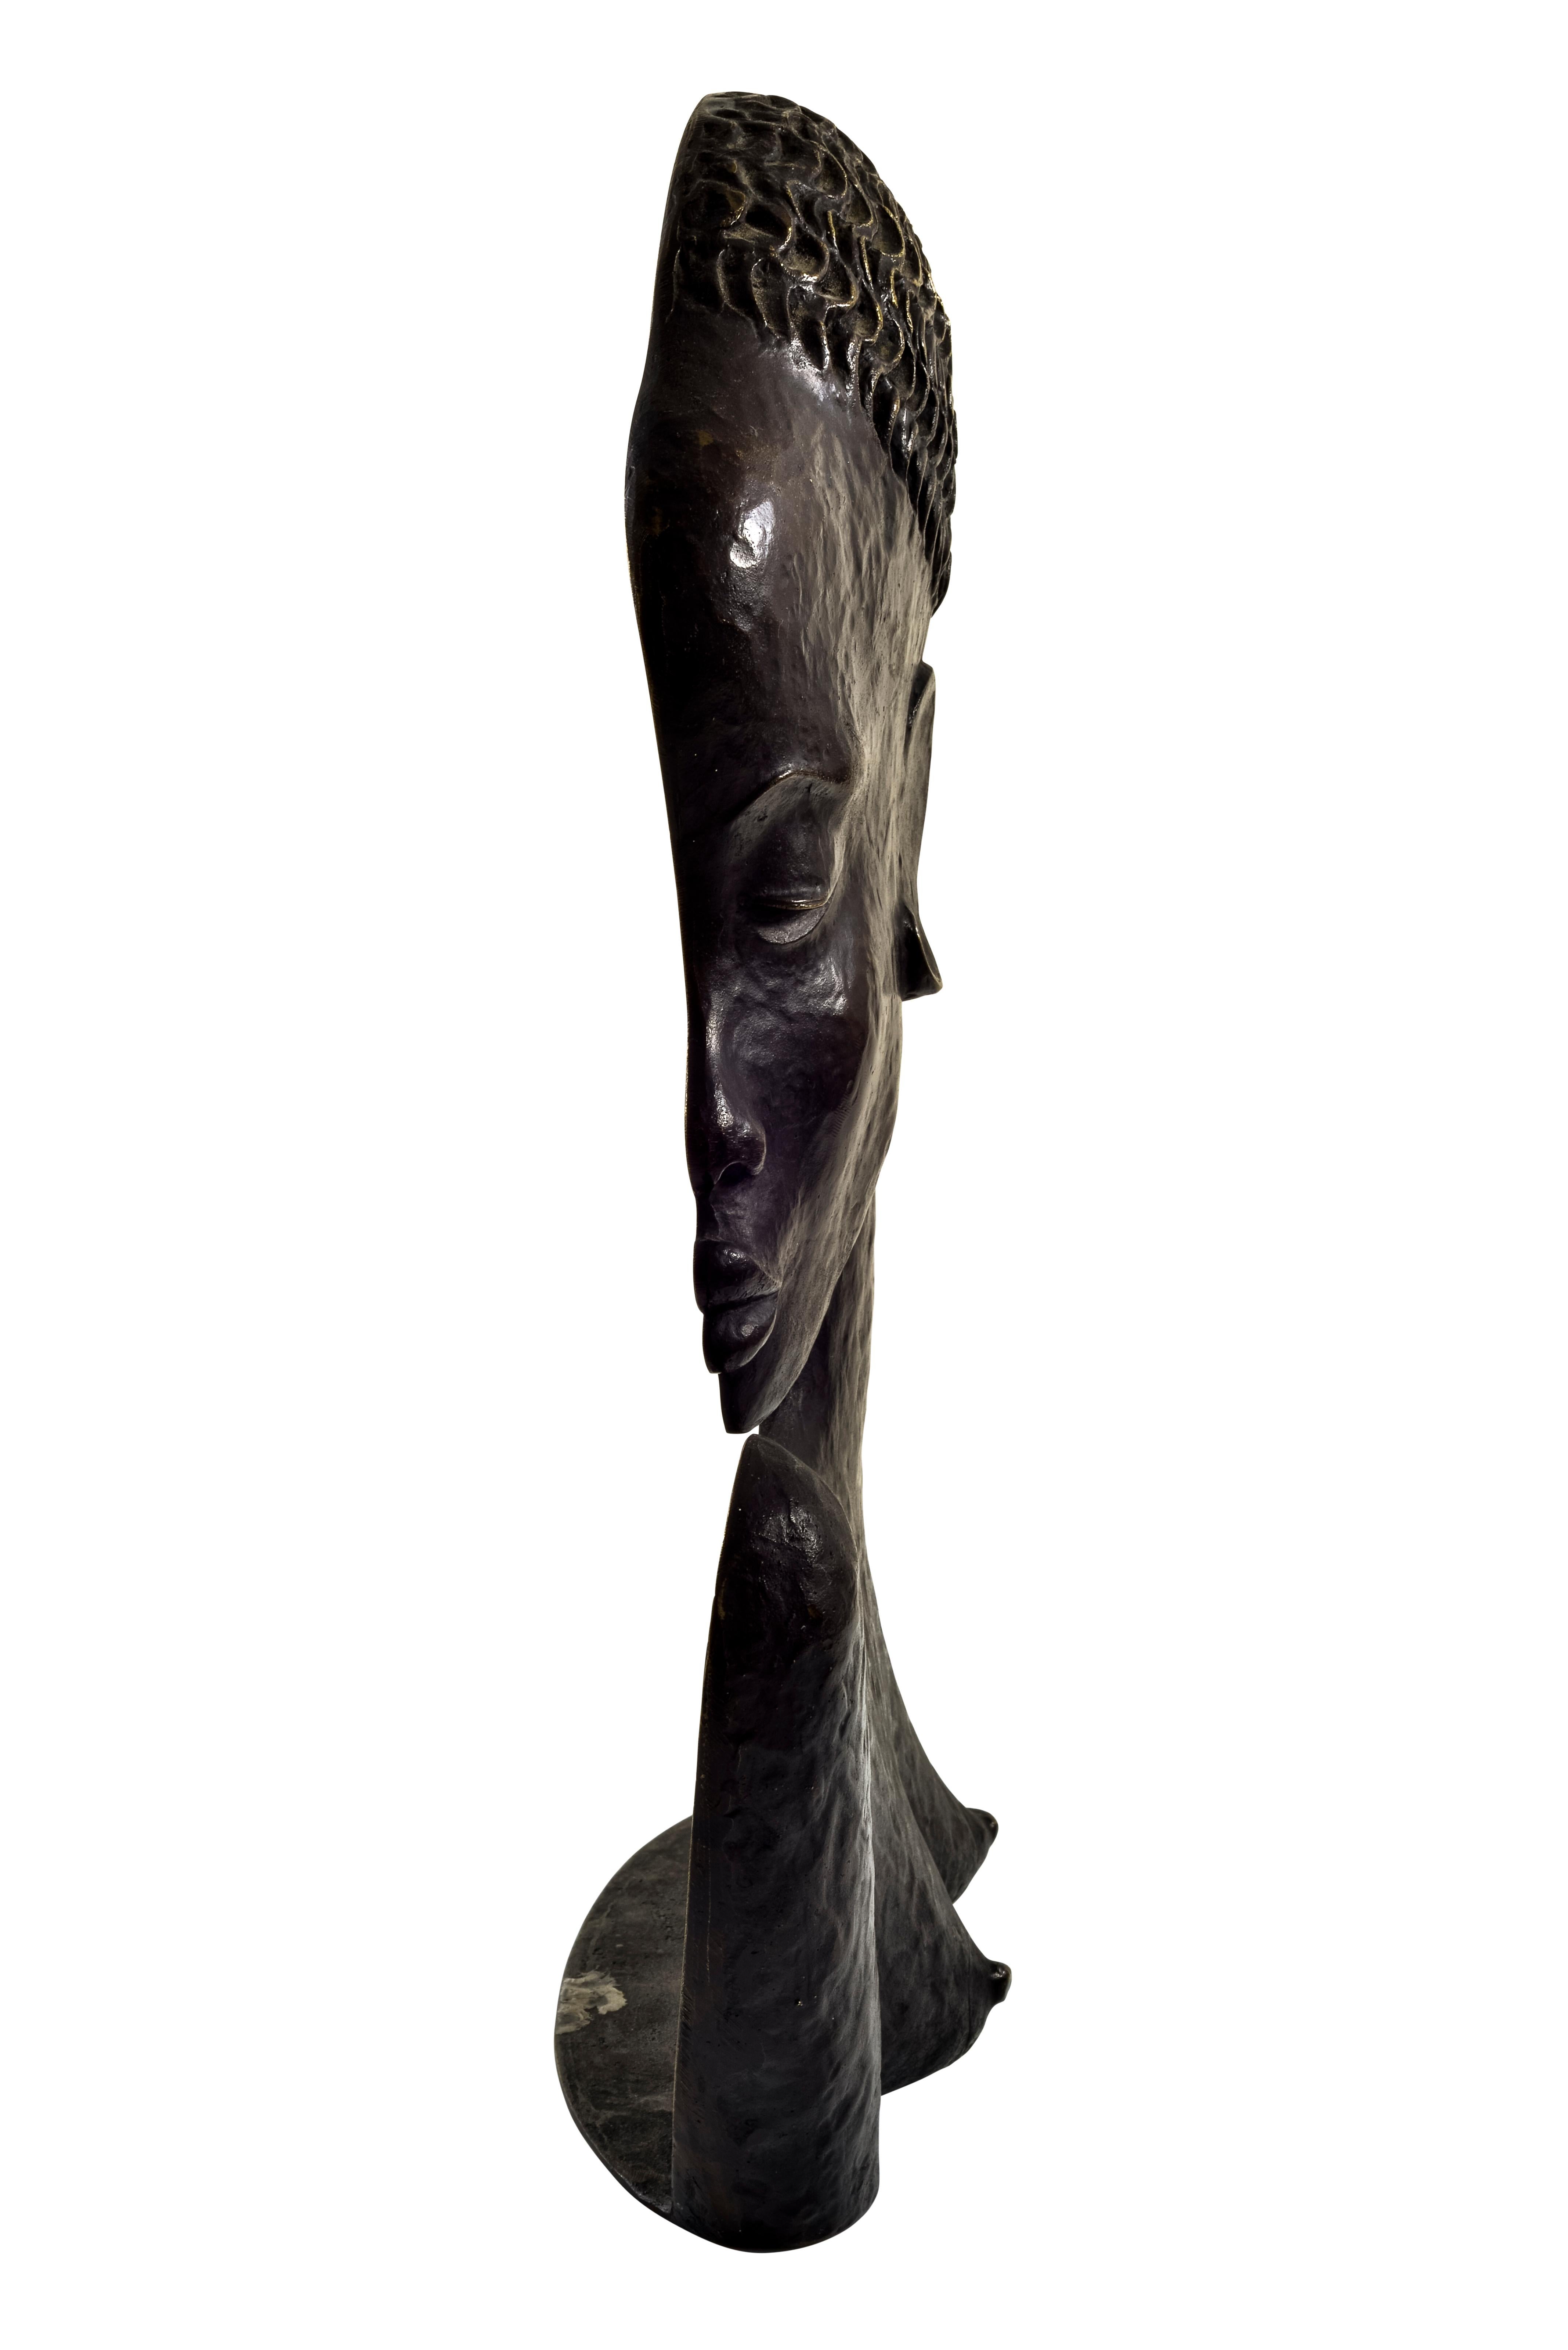 Bust of an African woman Werkstatte Hagenauer Wien circa 1935 Austrian Art Deco

This bust is a fine example of the early African-themed sculptures from the Hagenauer workshop. On the basis of the marking 